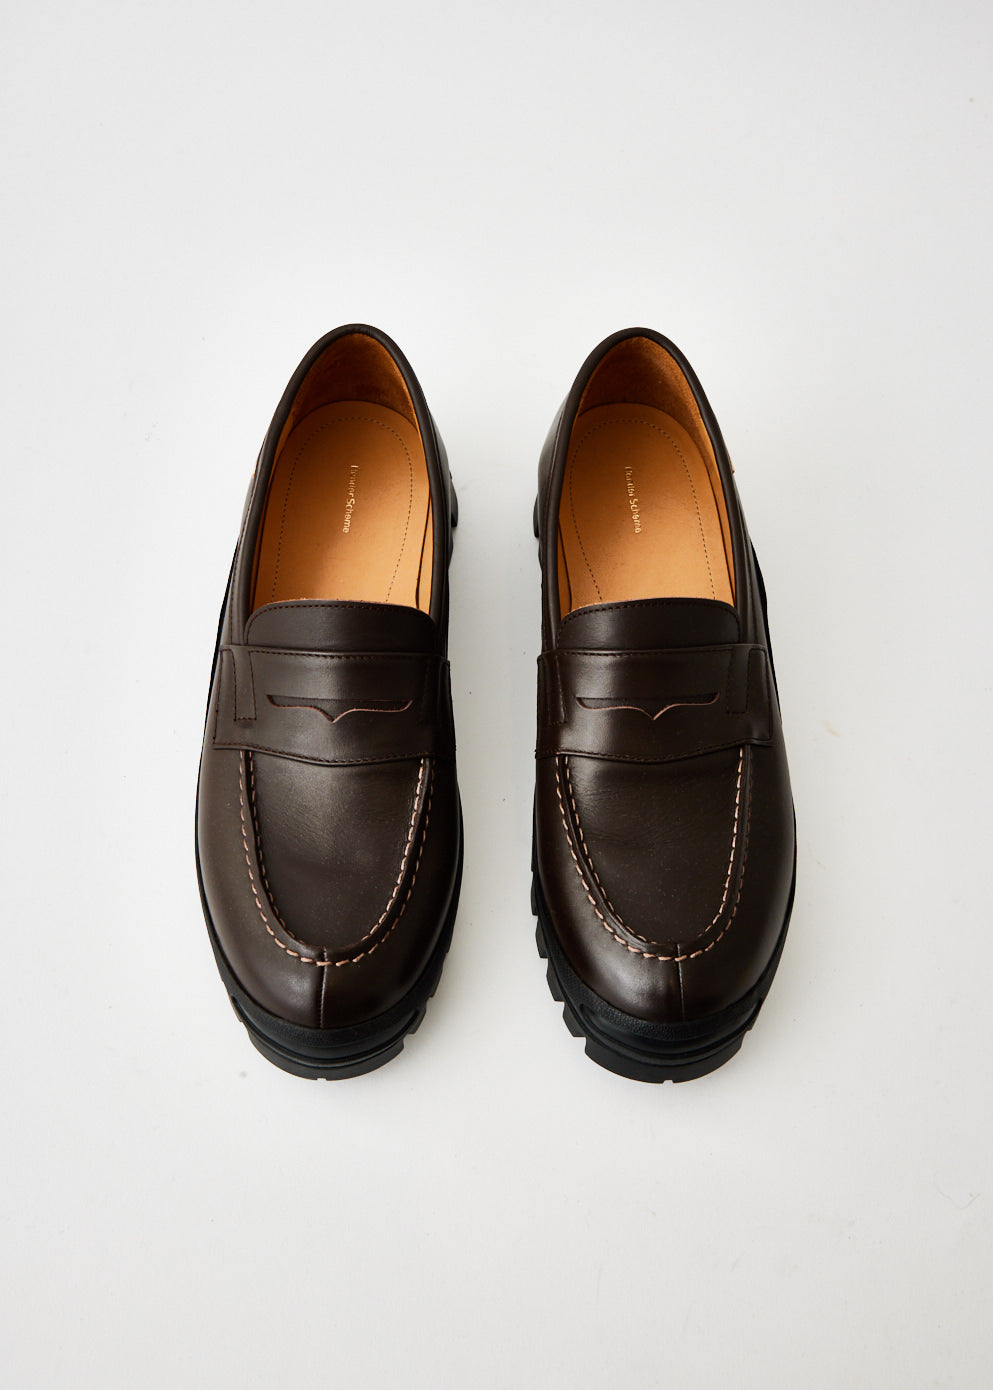 #2146 Loafers